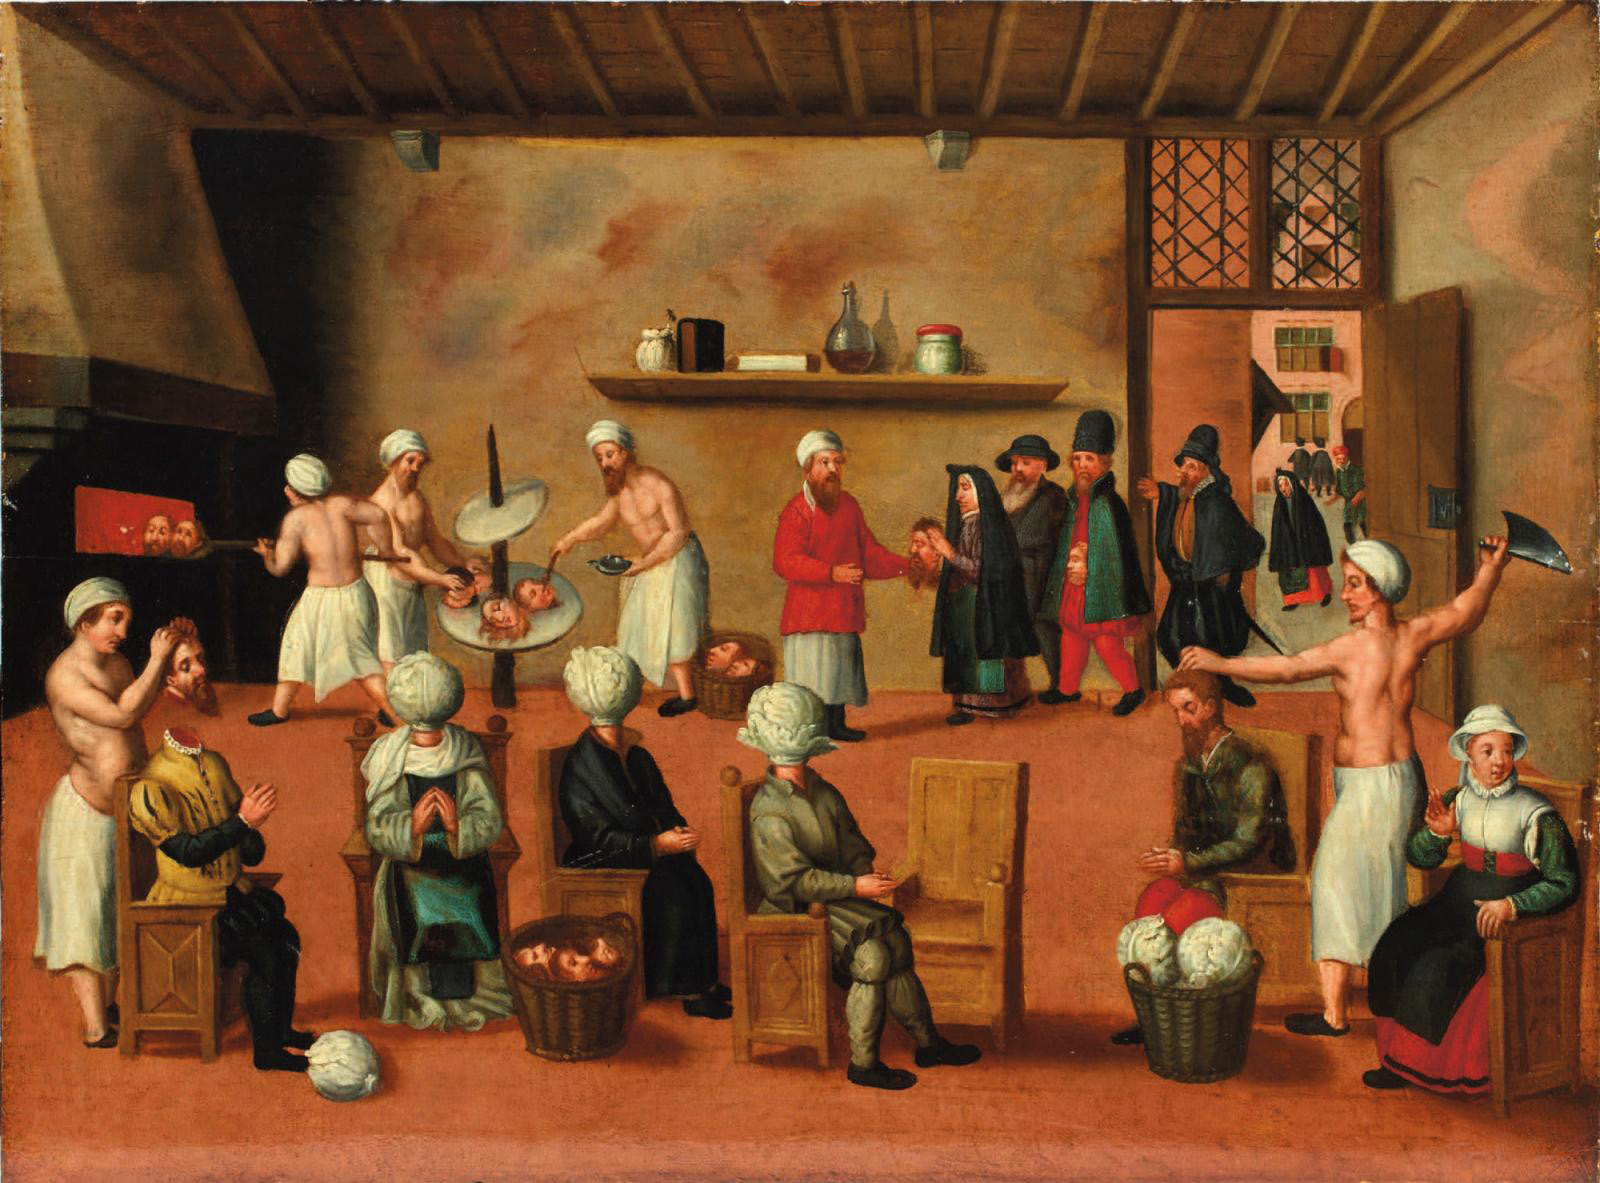 This painting, by the circle of Cornelis Van Dalem (c. 1530-1573), depicts The Legend of the Baker of Eecklo (49 x 66 cm/19.3 x 26 in), wh